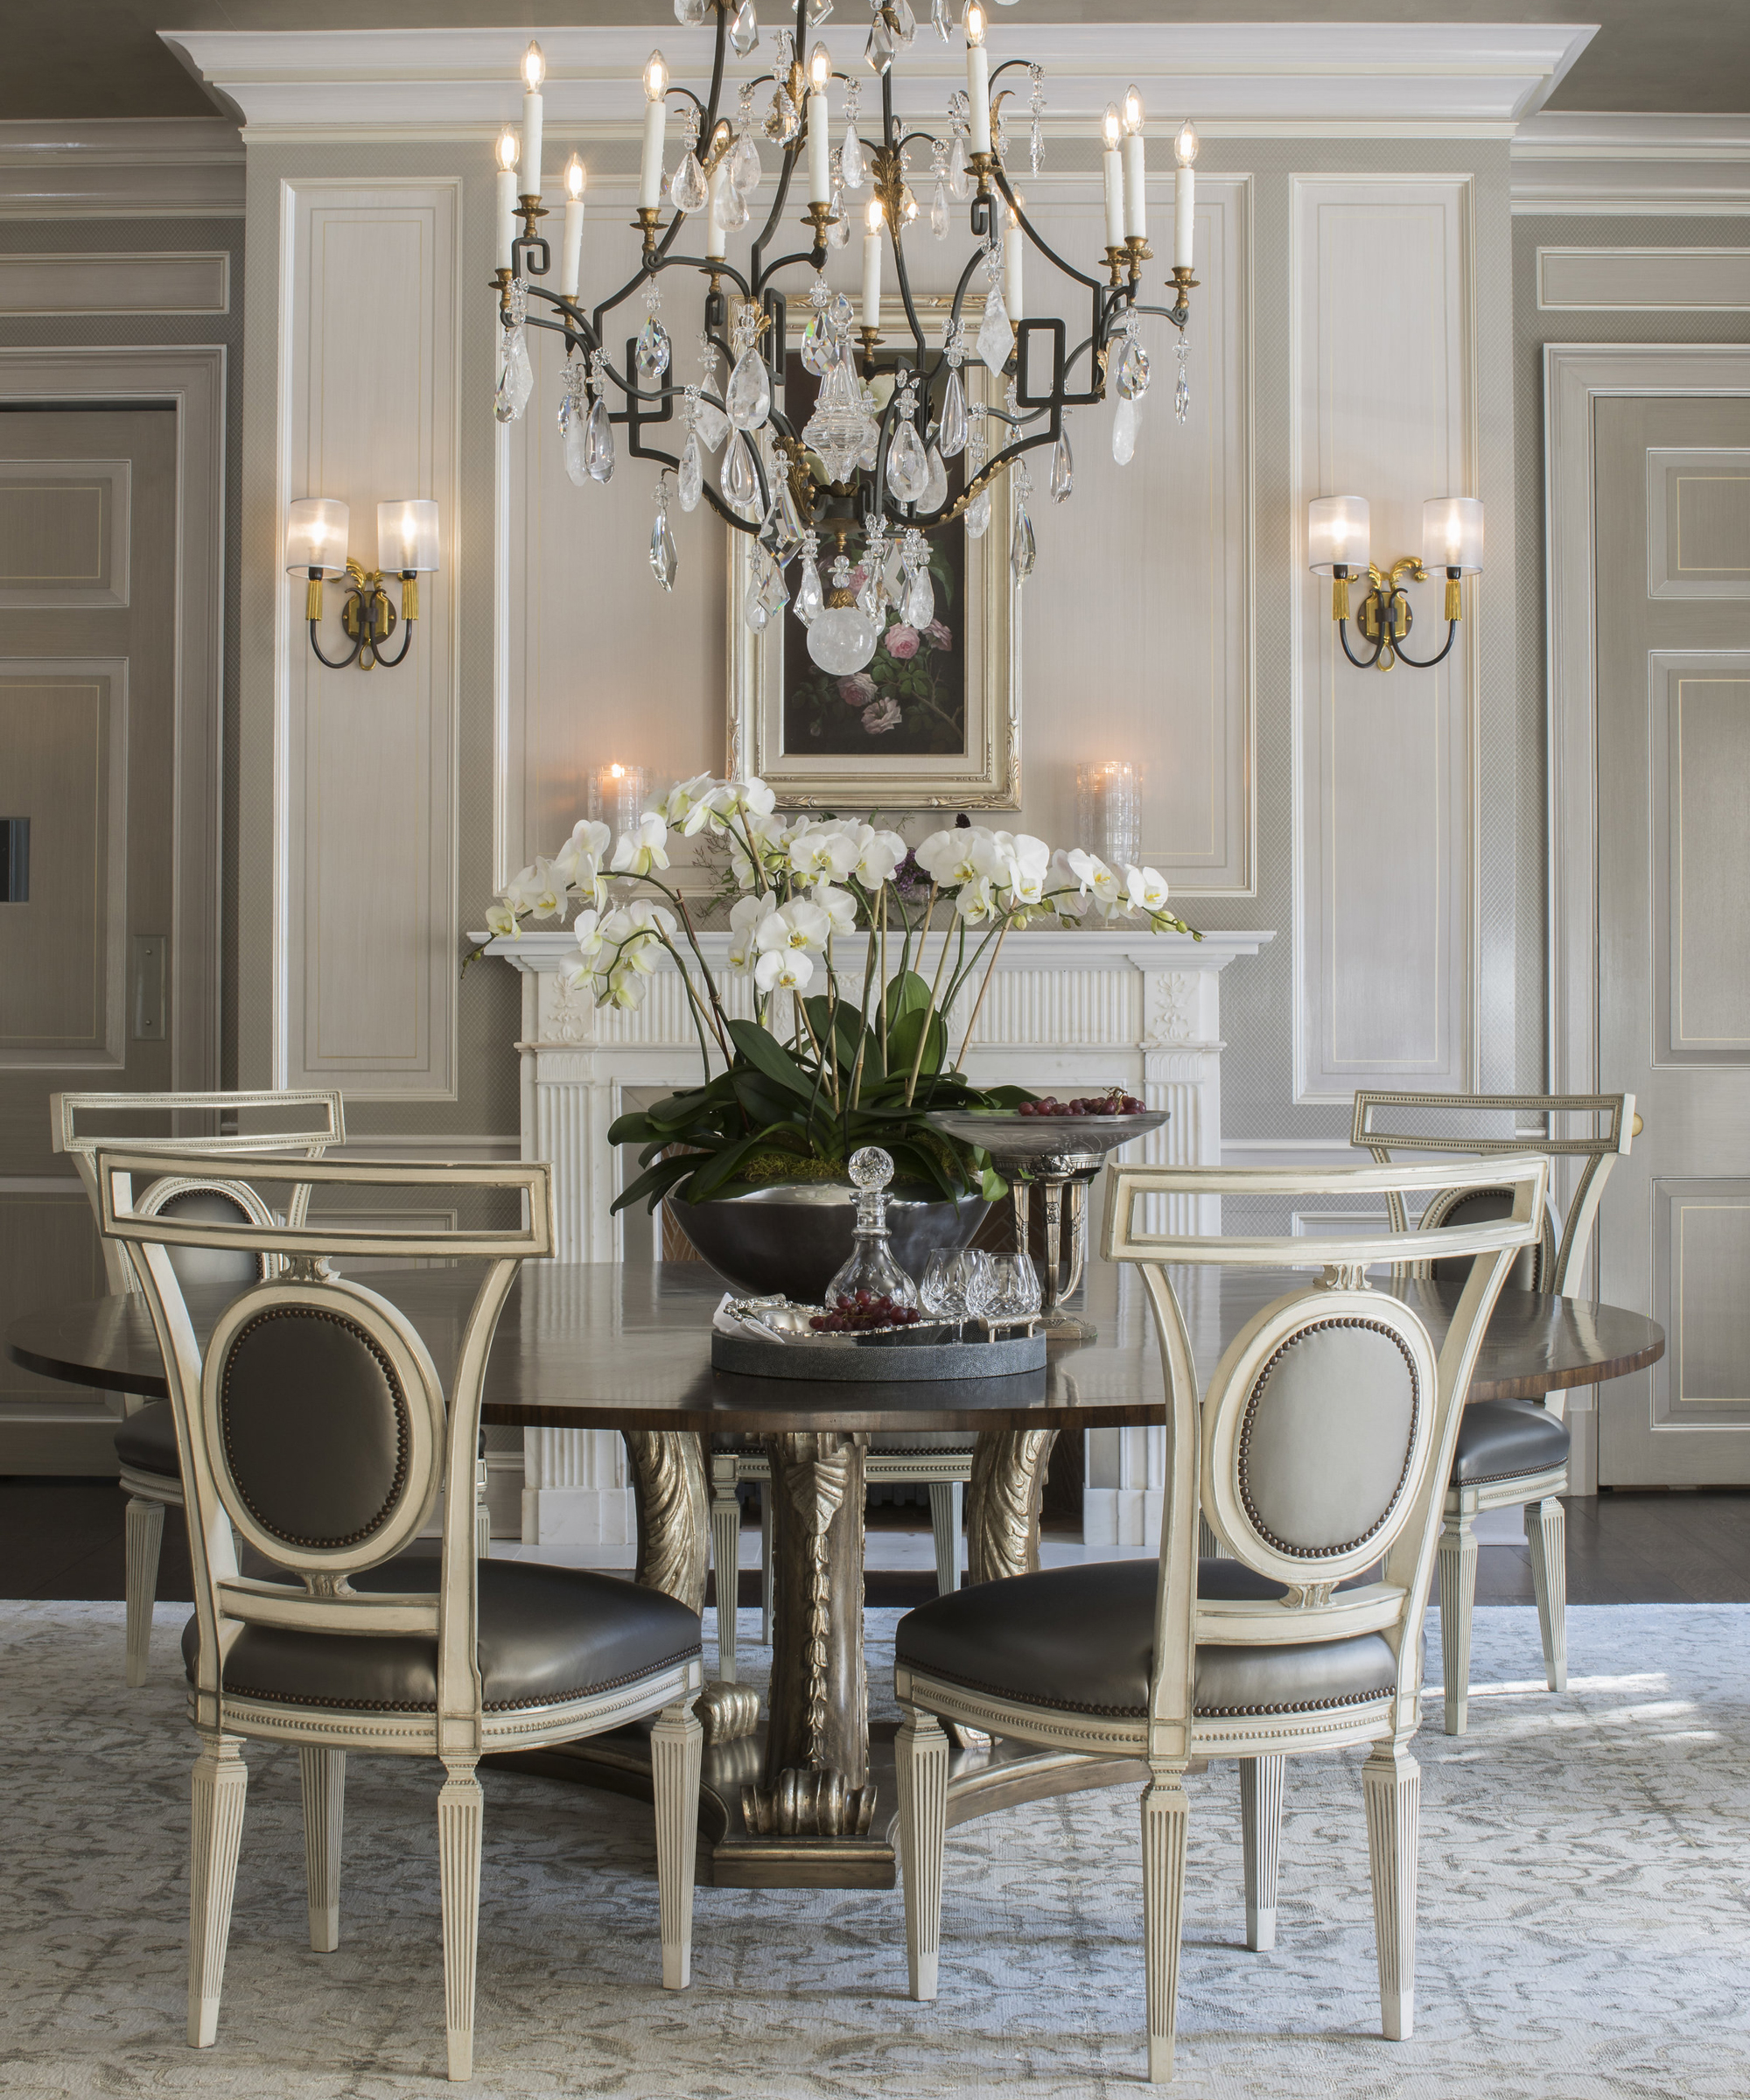 A dining table decor idea with a round table in a grey dining table with chandelier and orchid display in the center